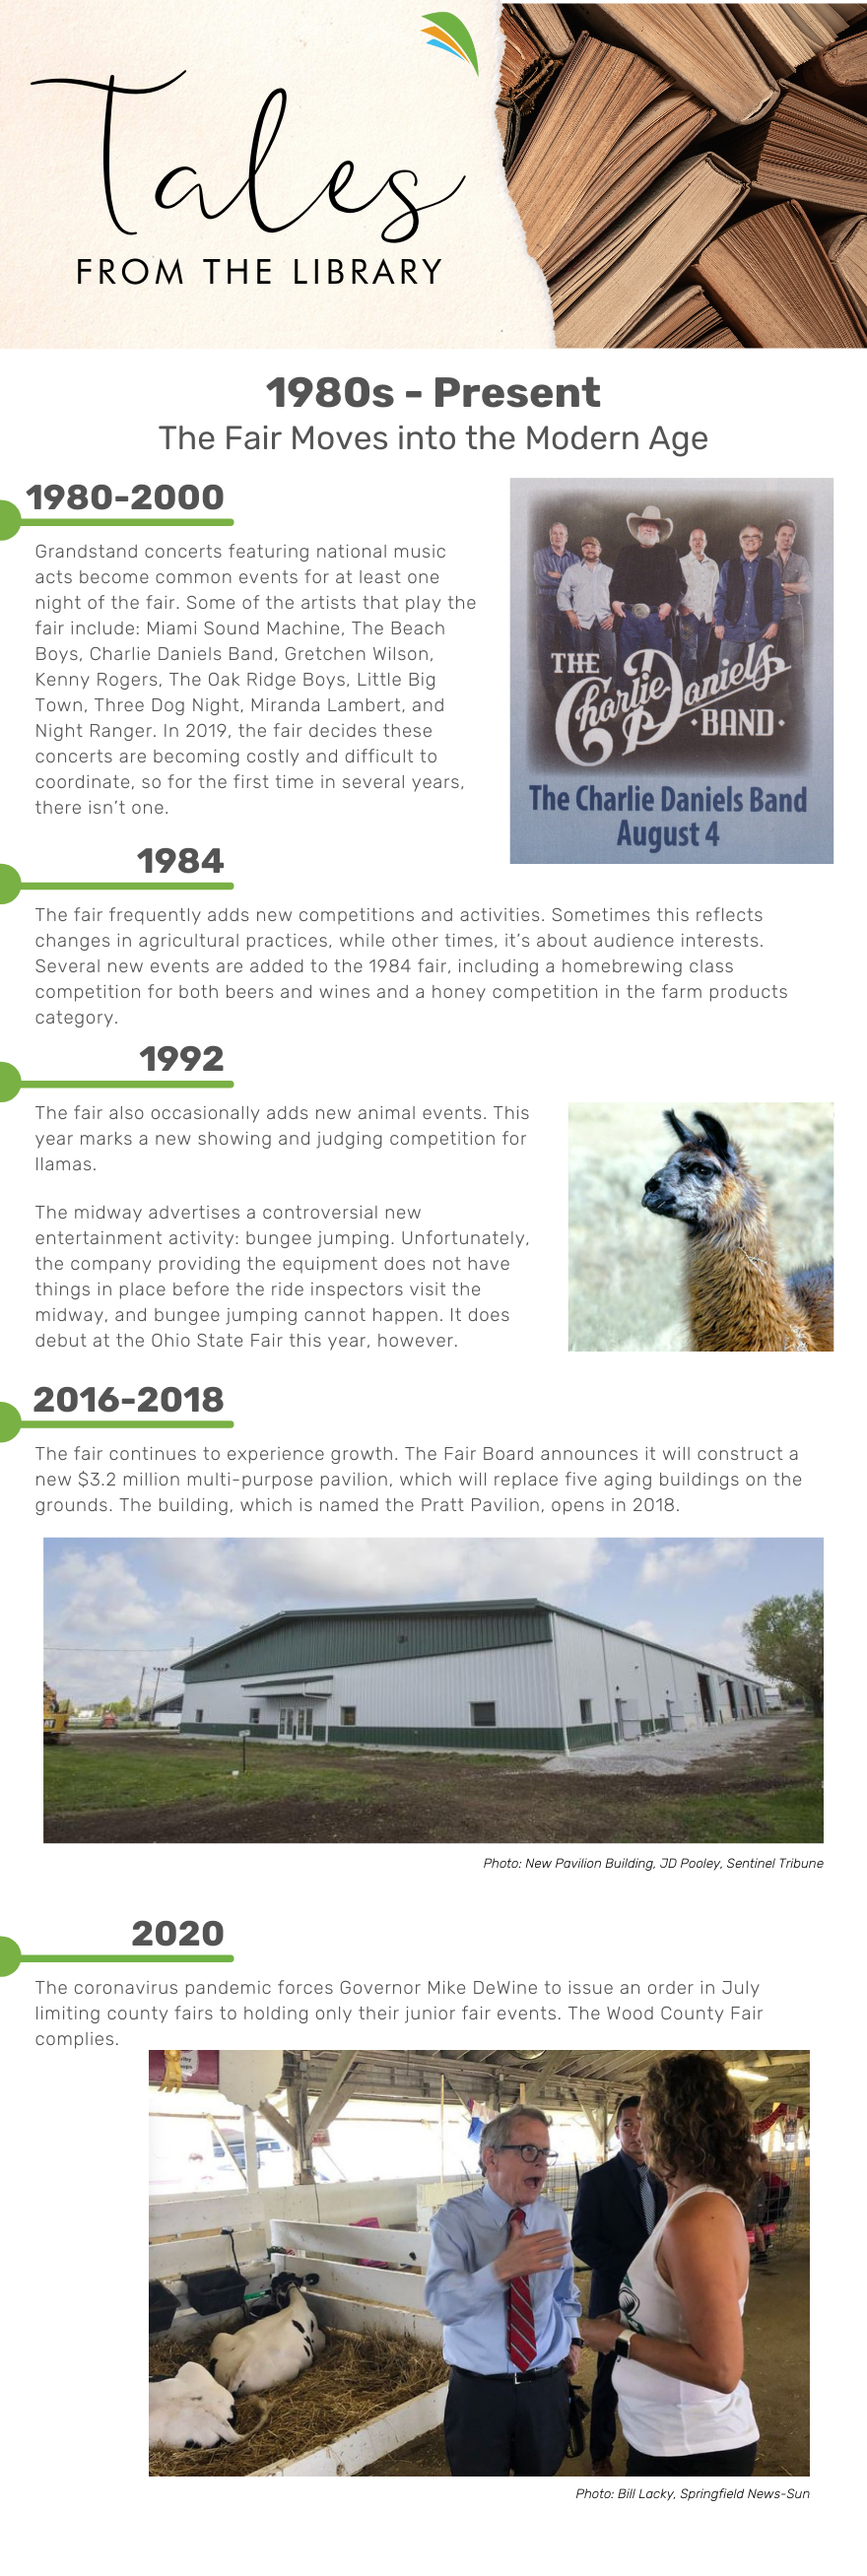 A timeline of events during the fair from 1980-present